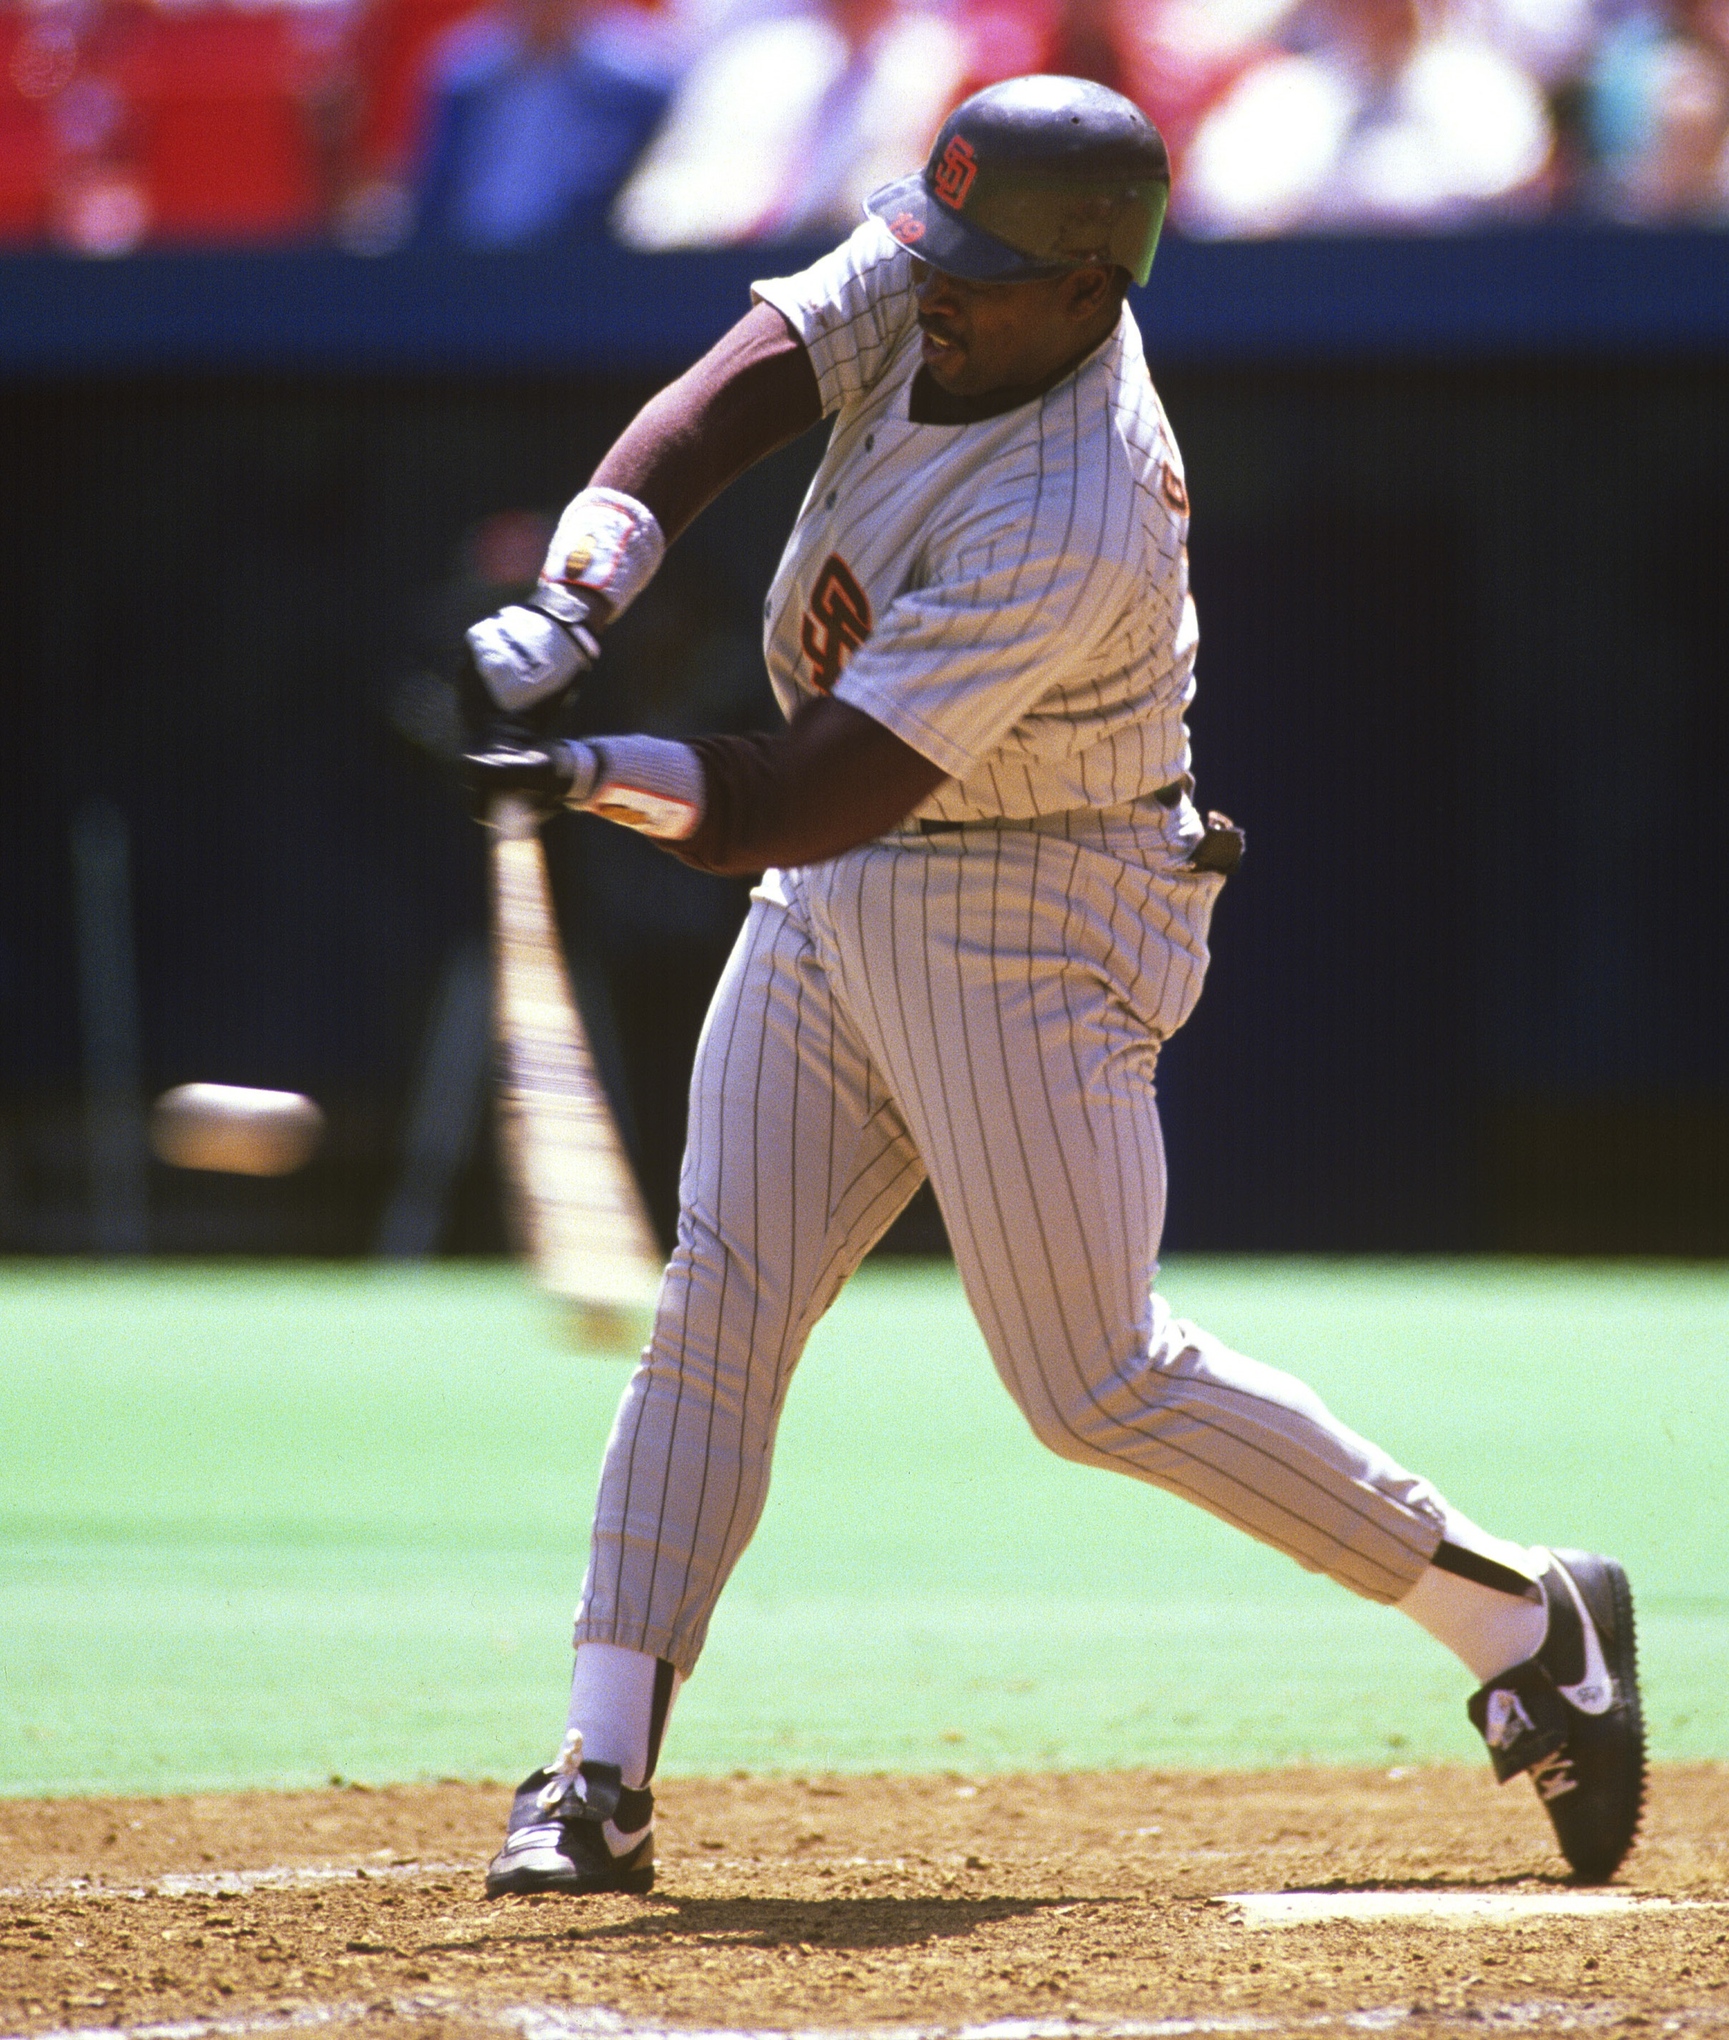 Rest In Peace Mr. Padre - Tony Gwynn and Smokeless Tobacco 